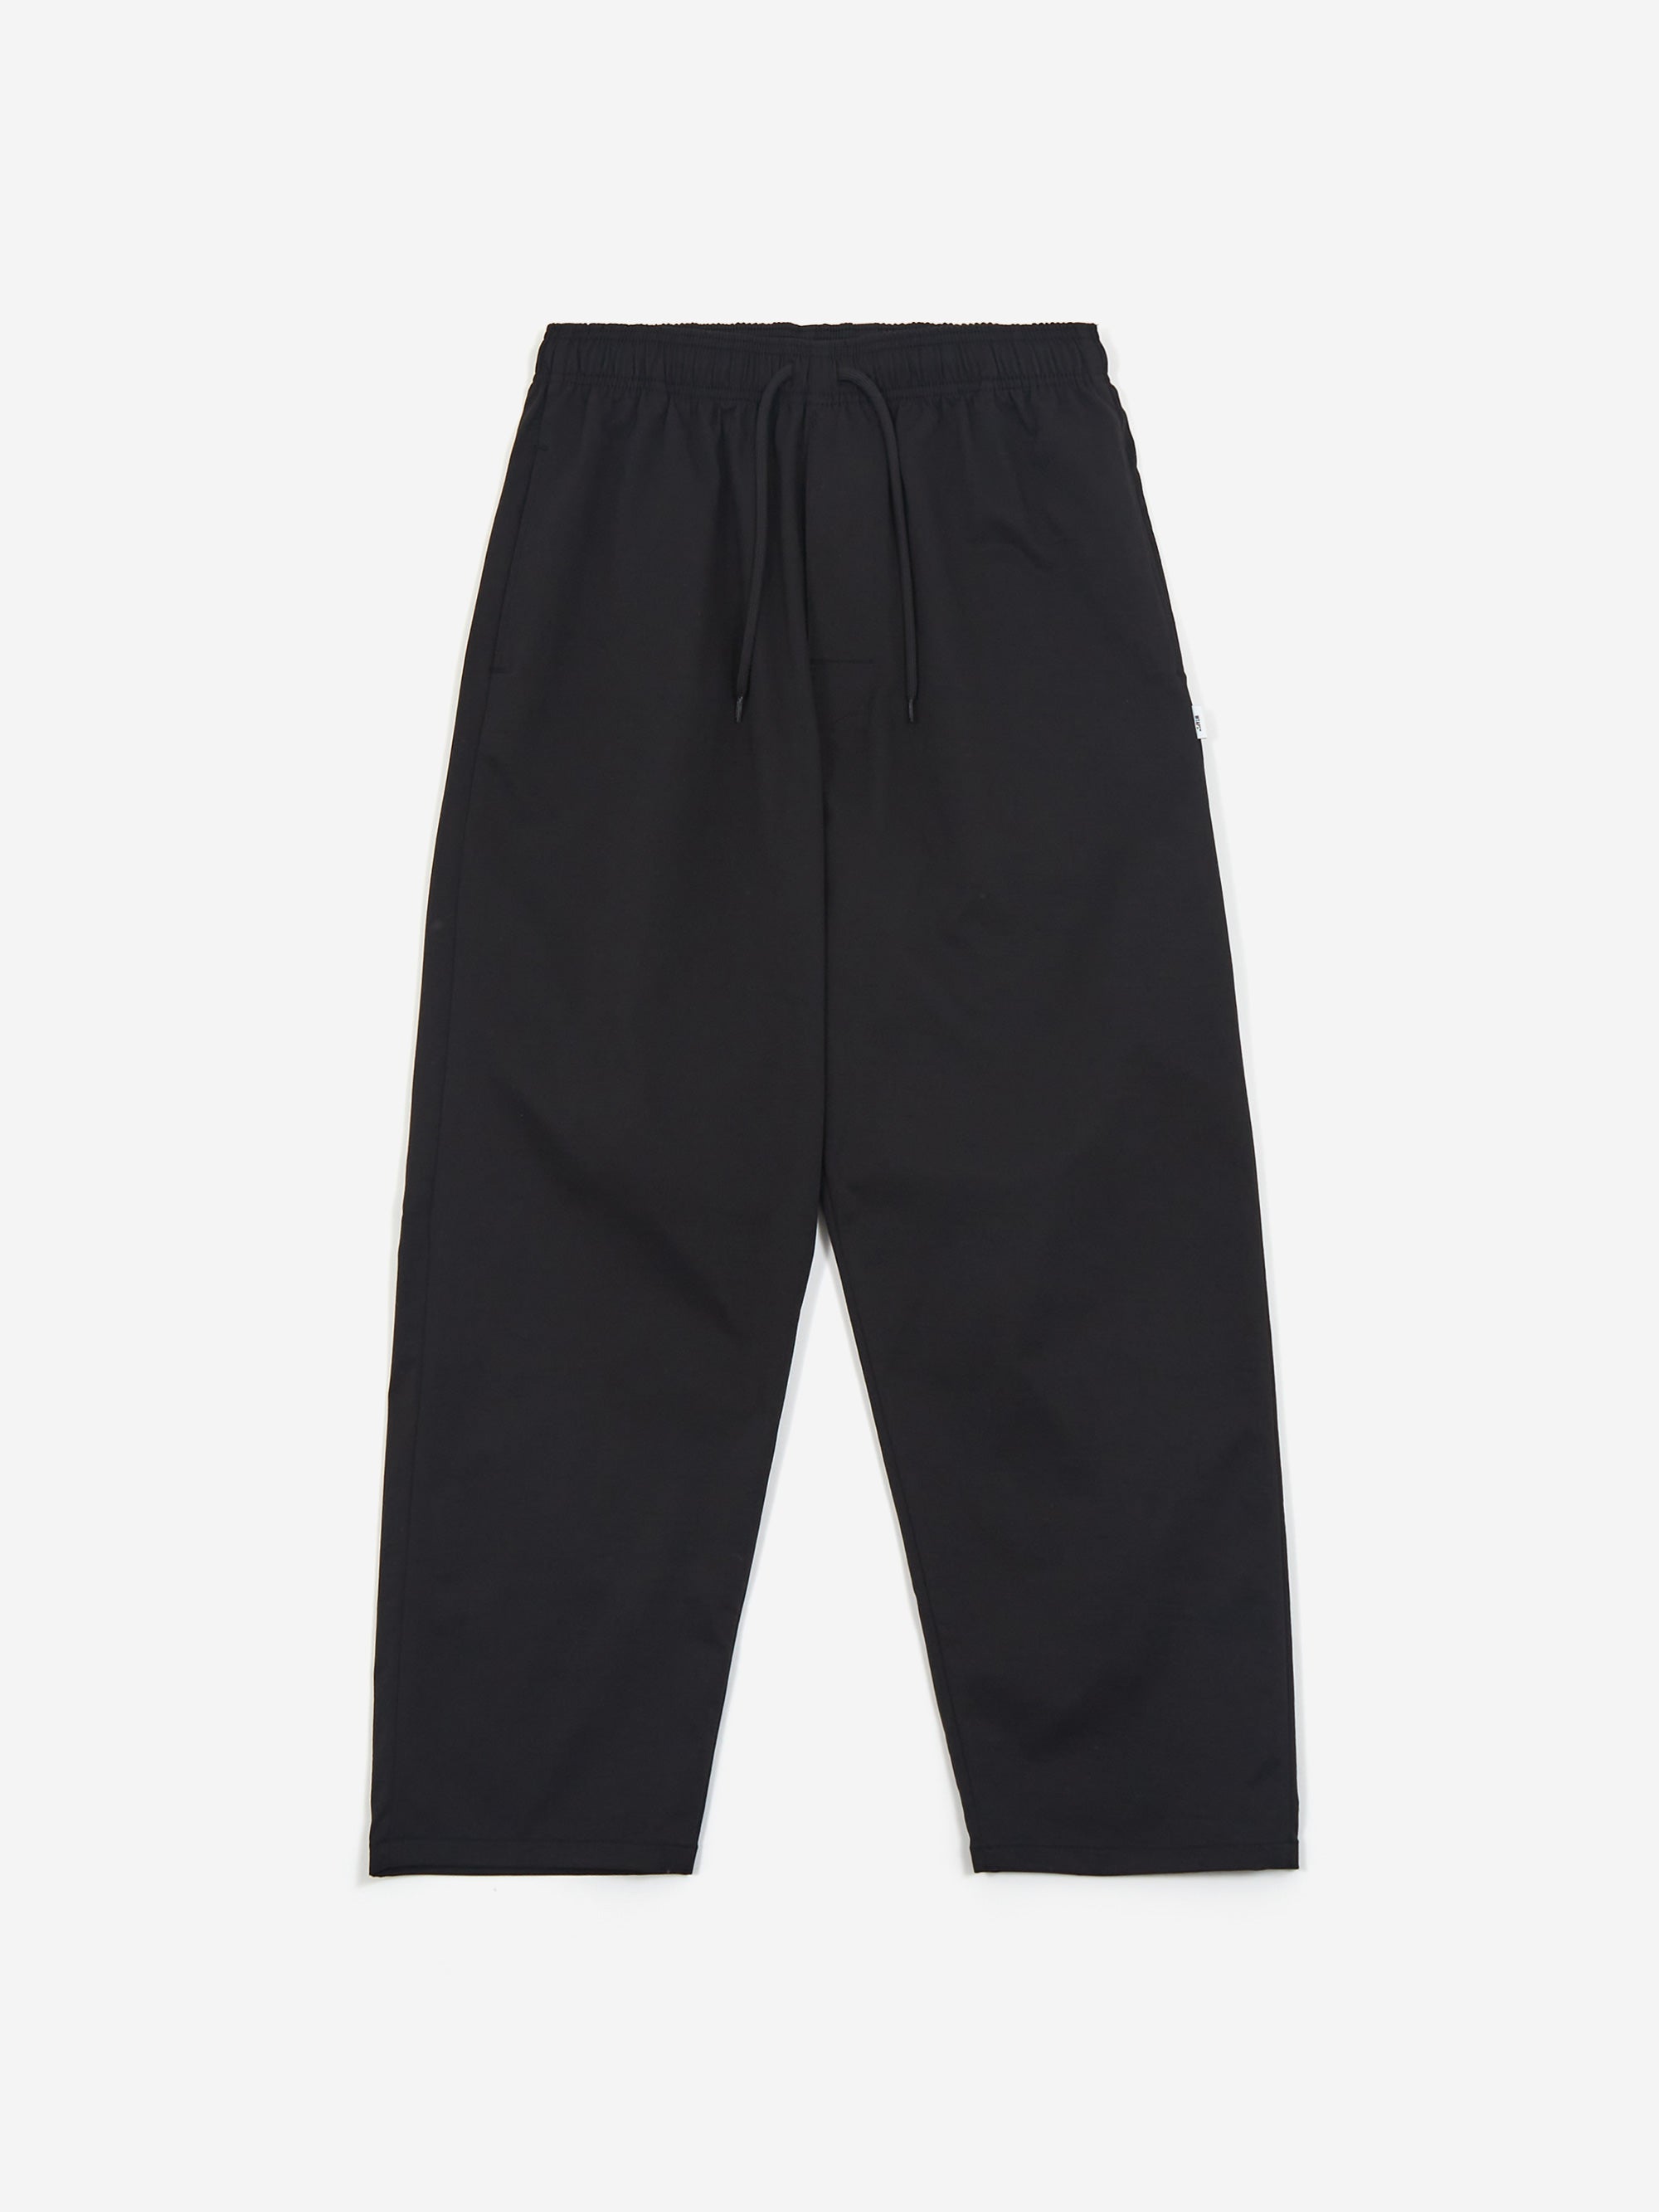 WTAPS Seagull 01 / Trousers / Poly. Twill - Black – Goodhood